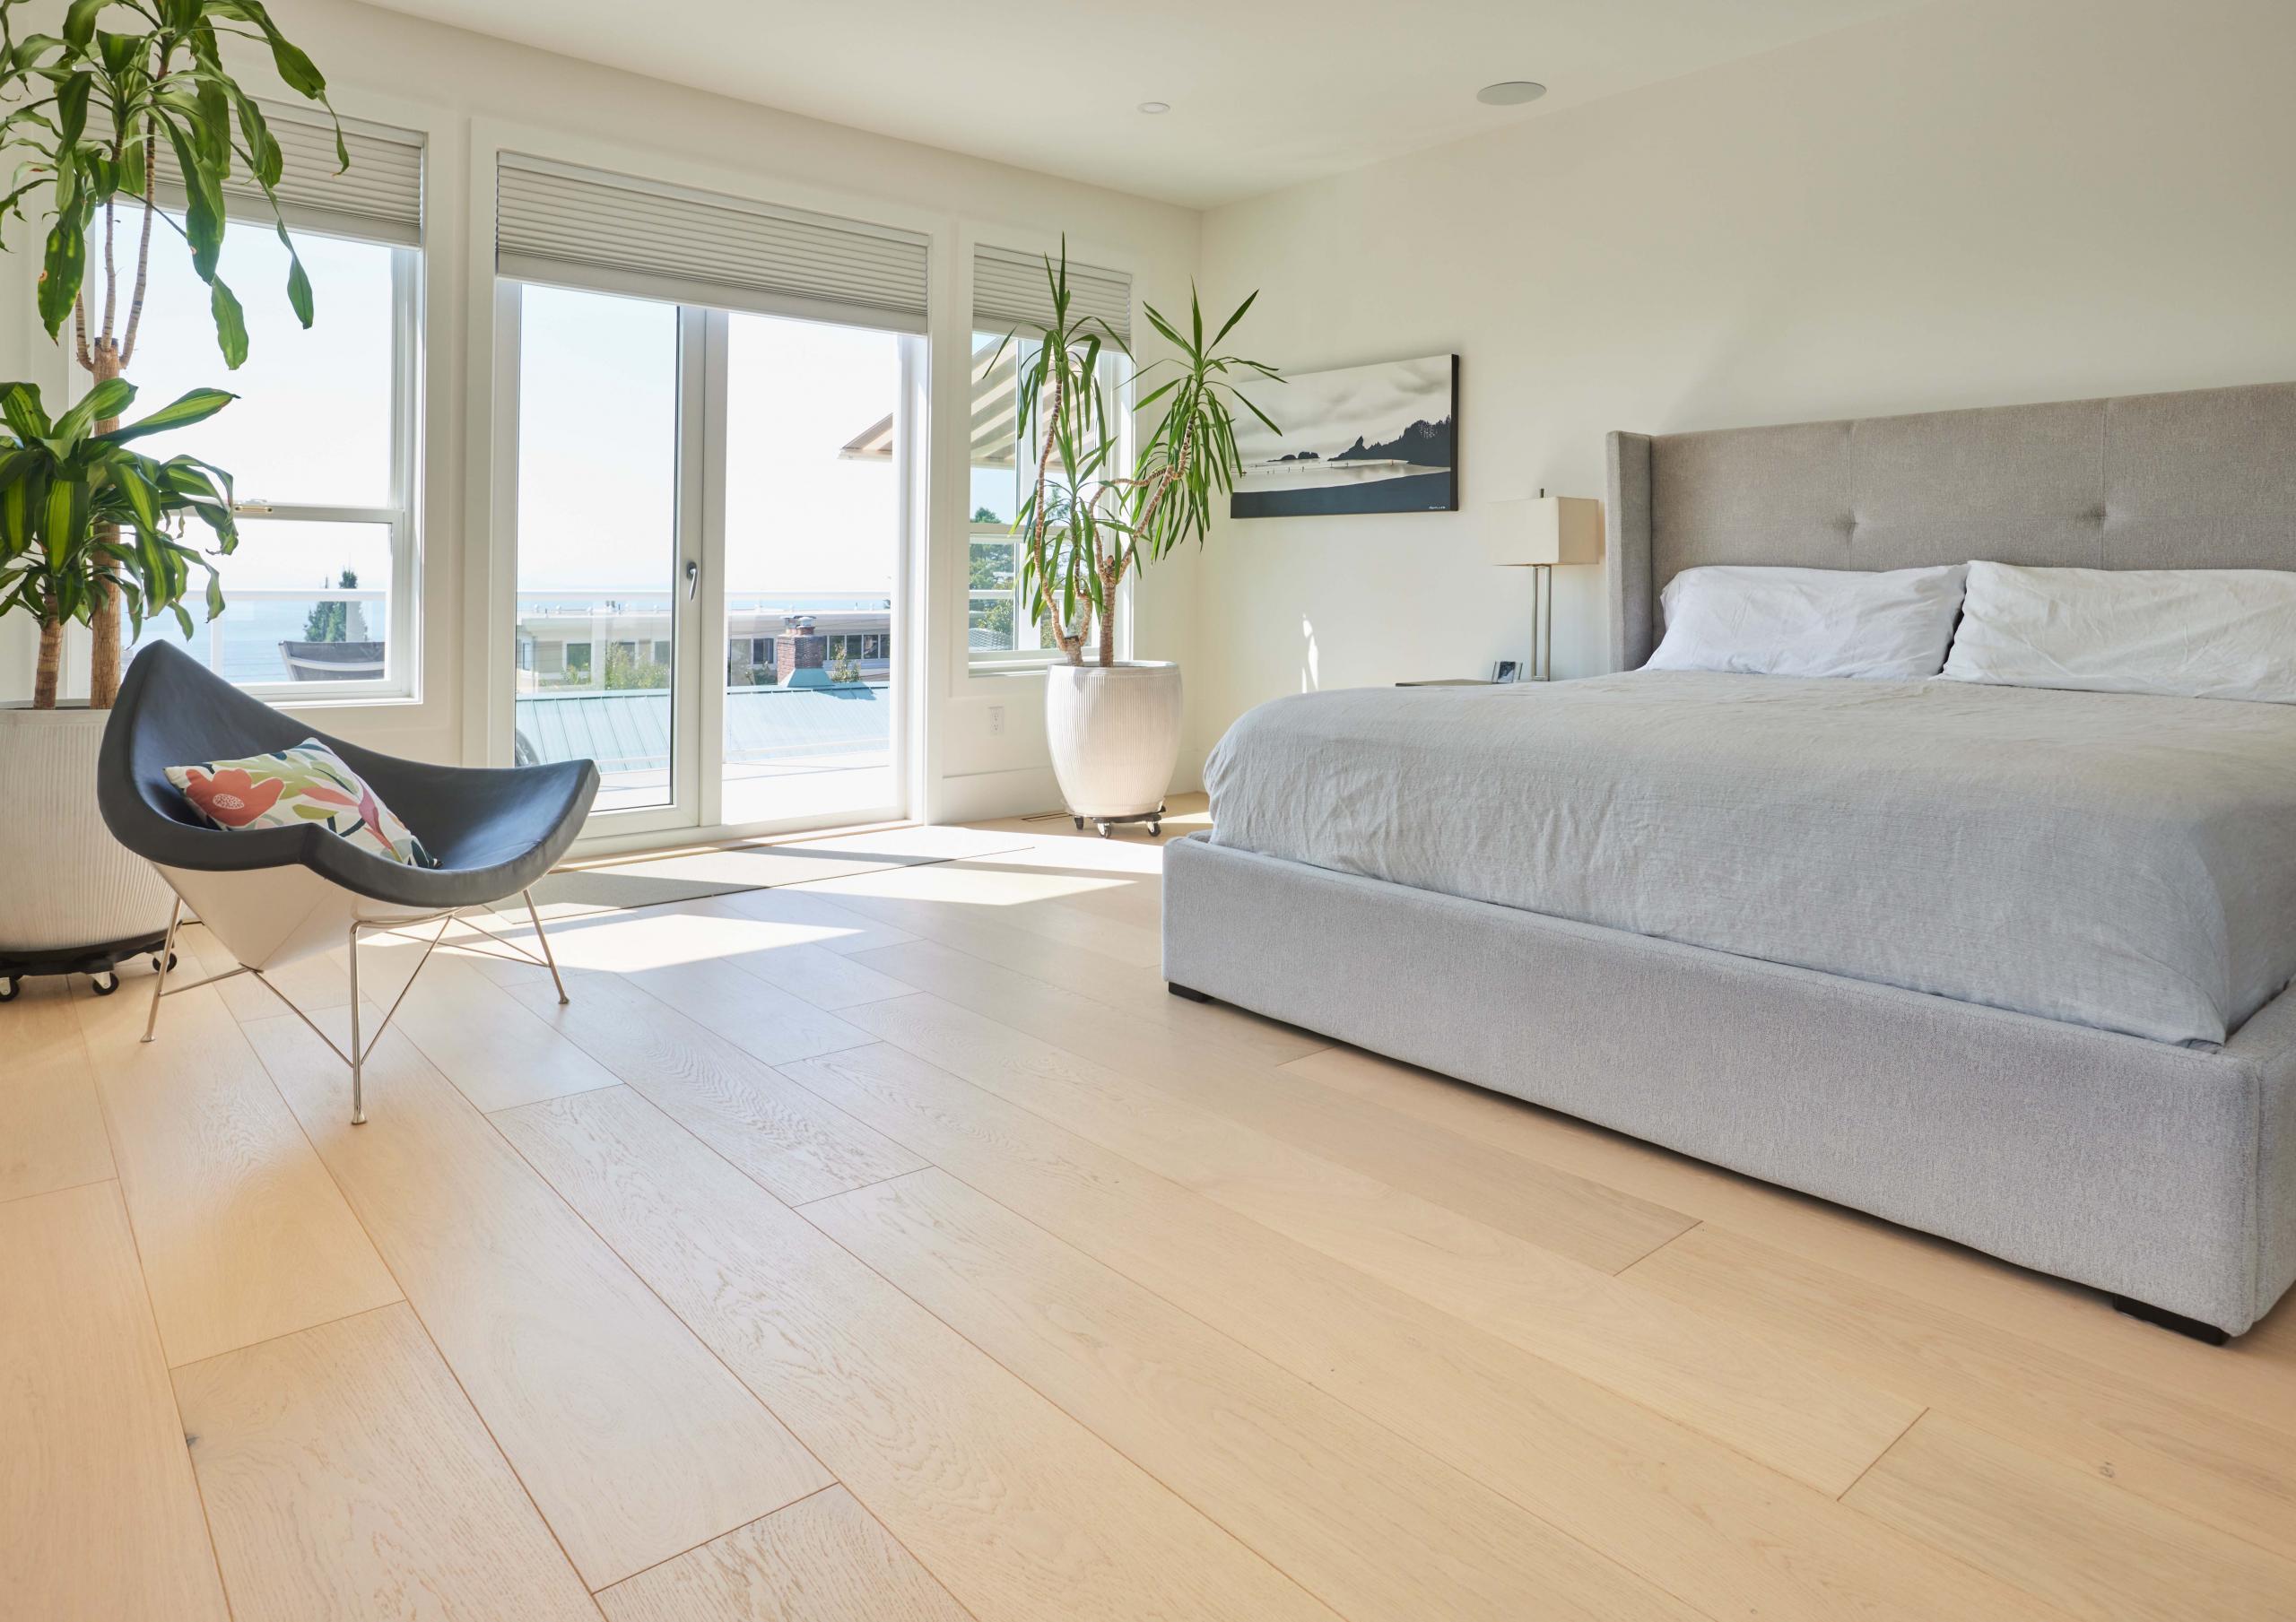 Photo of an ocean-view bedroom with minimalist interior design. There is a bed to the right of the image, and a designer chair on the left side. The Tulum floor from Couture by Kentwood is prominently featured in the photo.